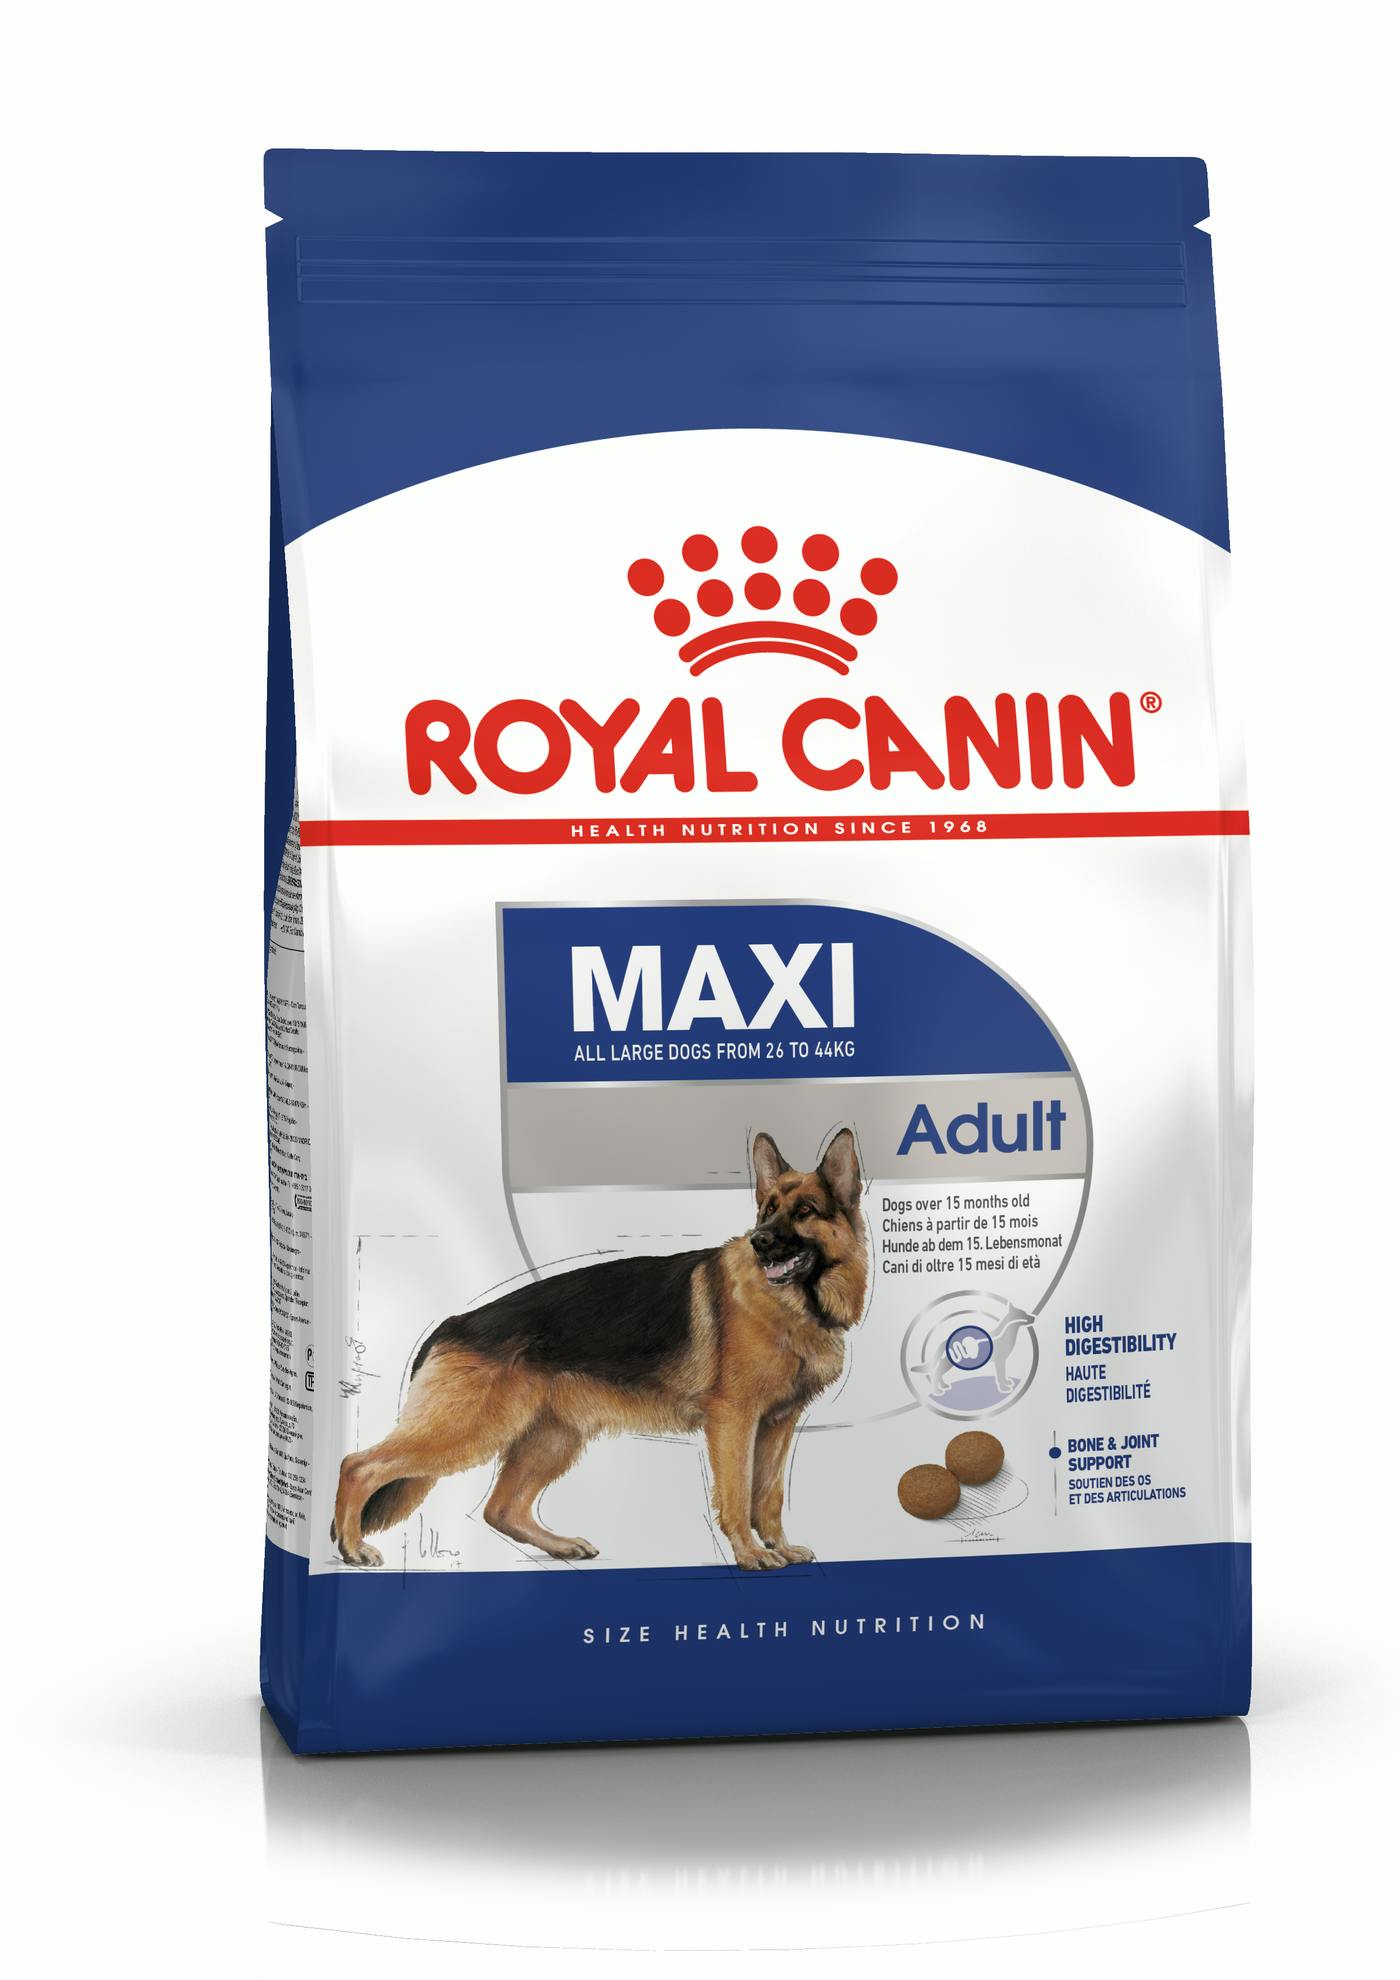 Royal Canin Maxi Adult 15 Months/5 Yearrs 4kg